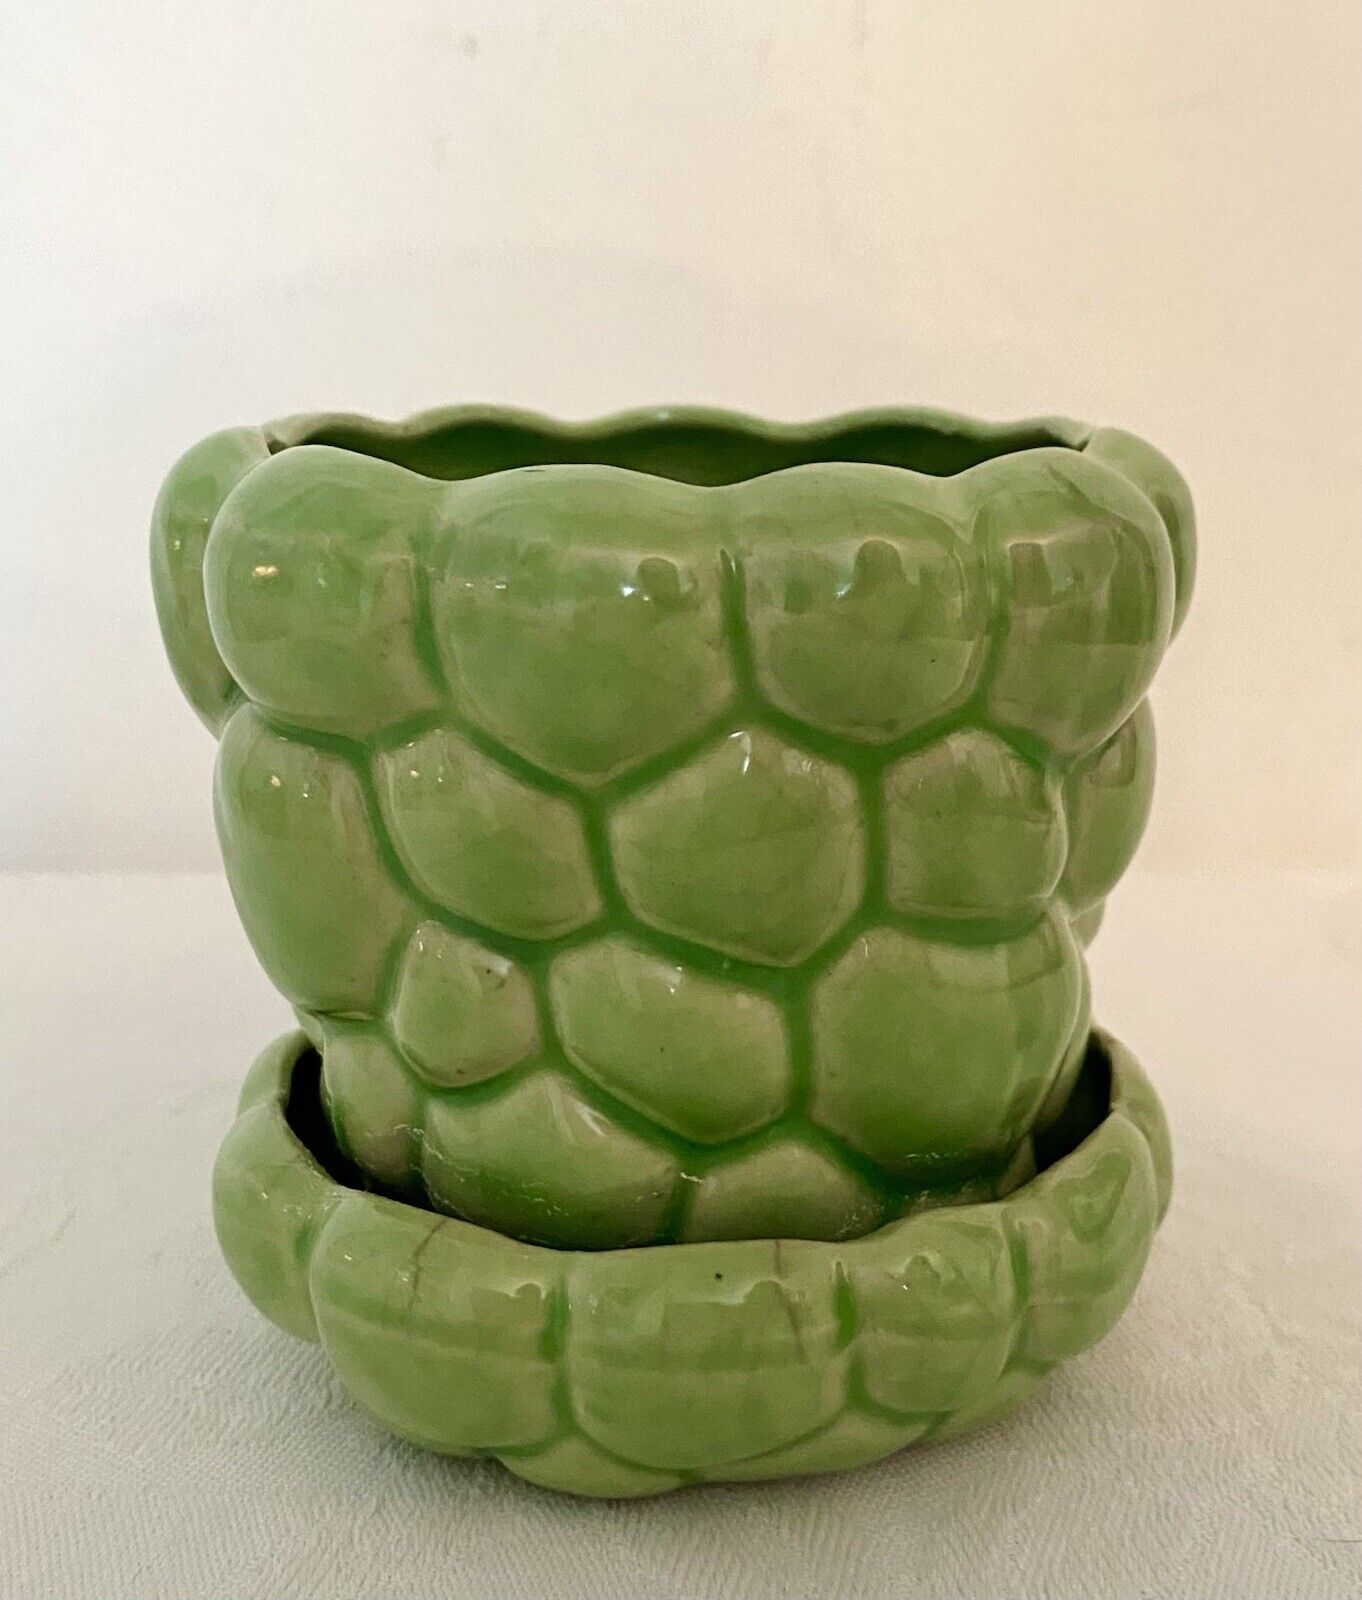 Vintage Art Pottery Green Pebble Flower Pot Planter with Attached Saucer Japan